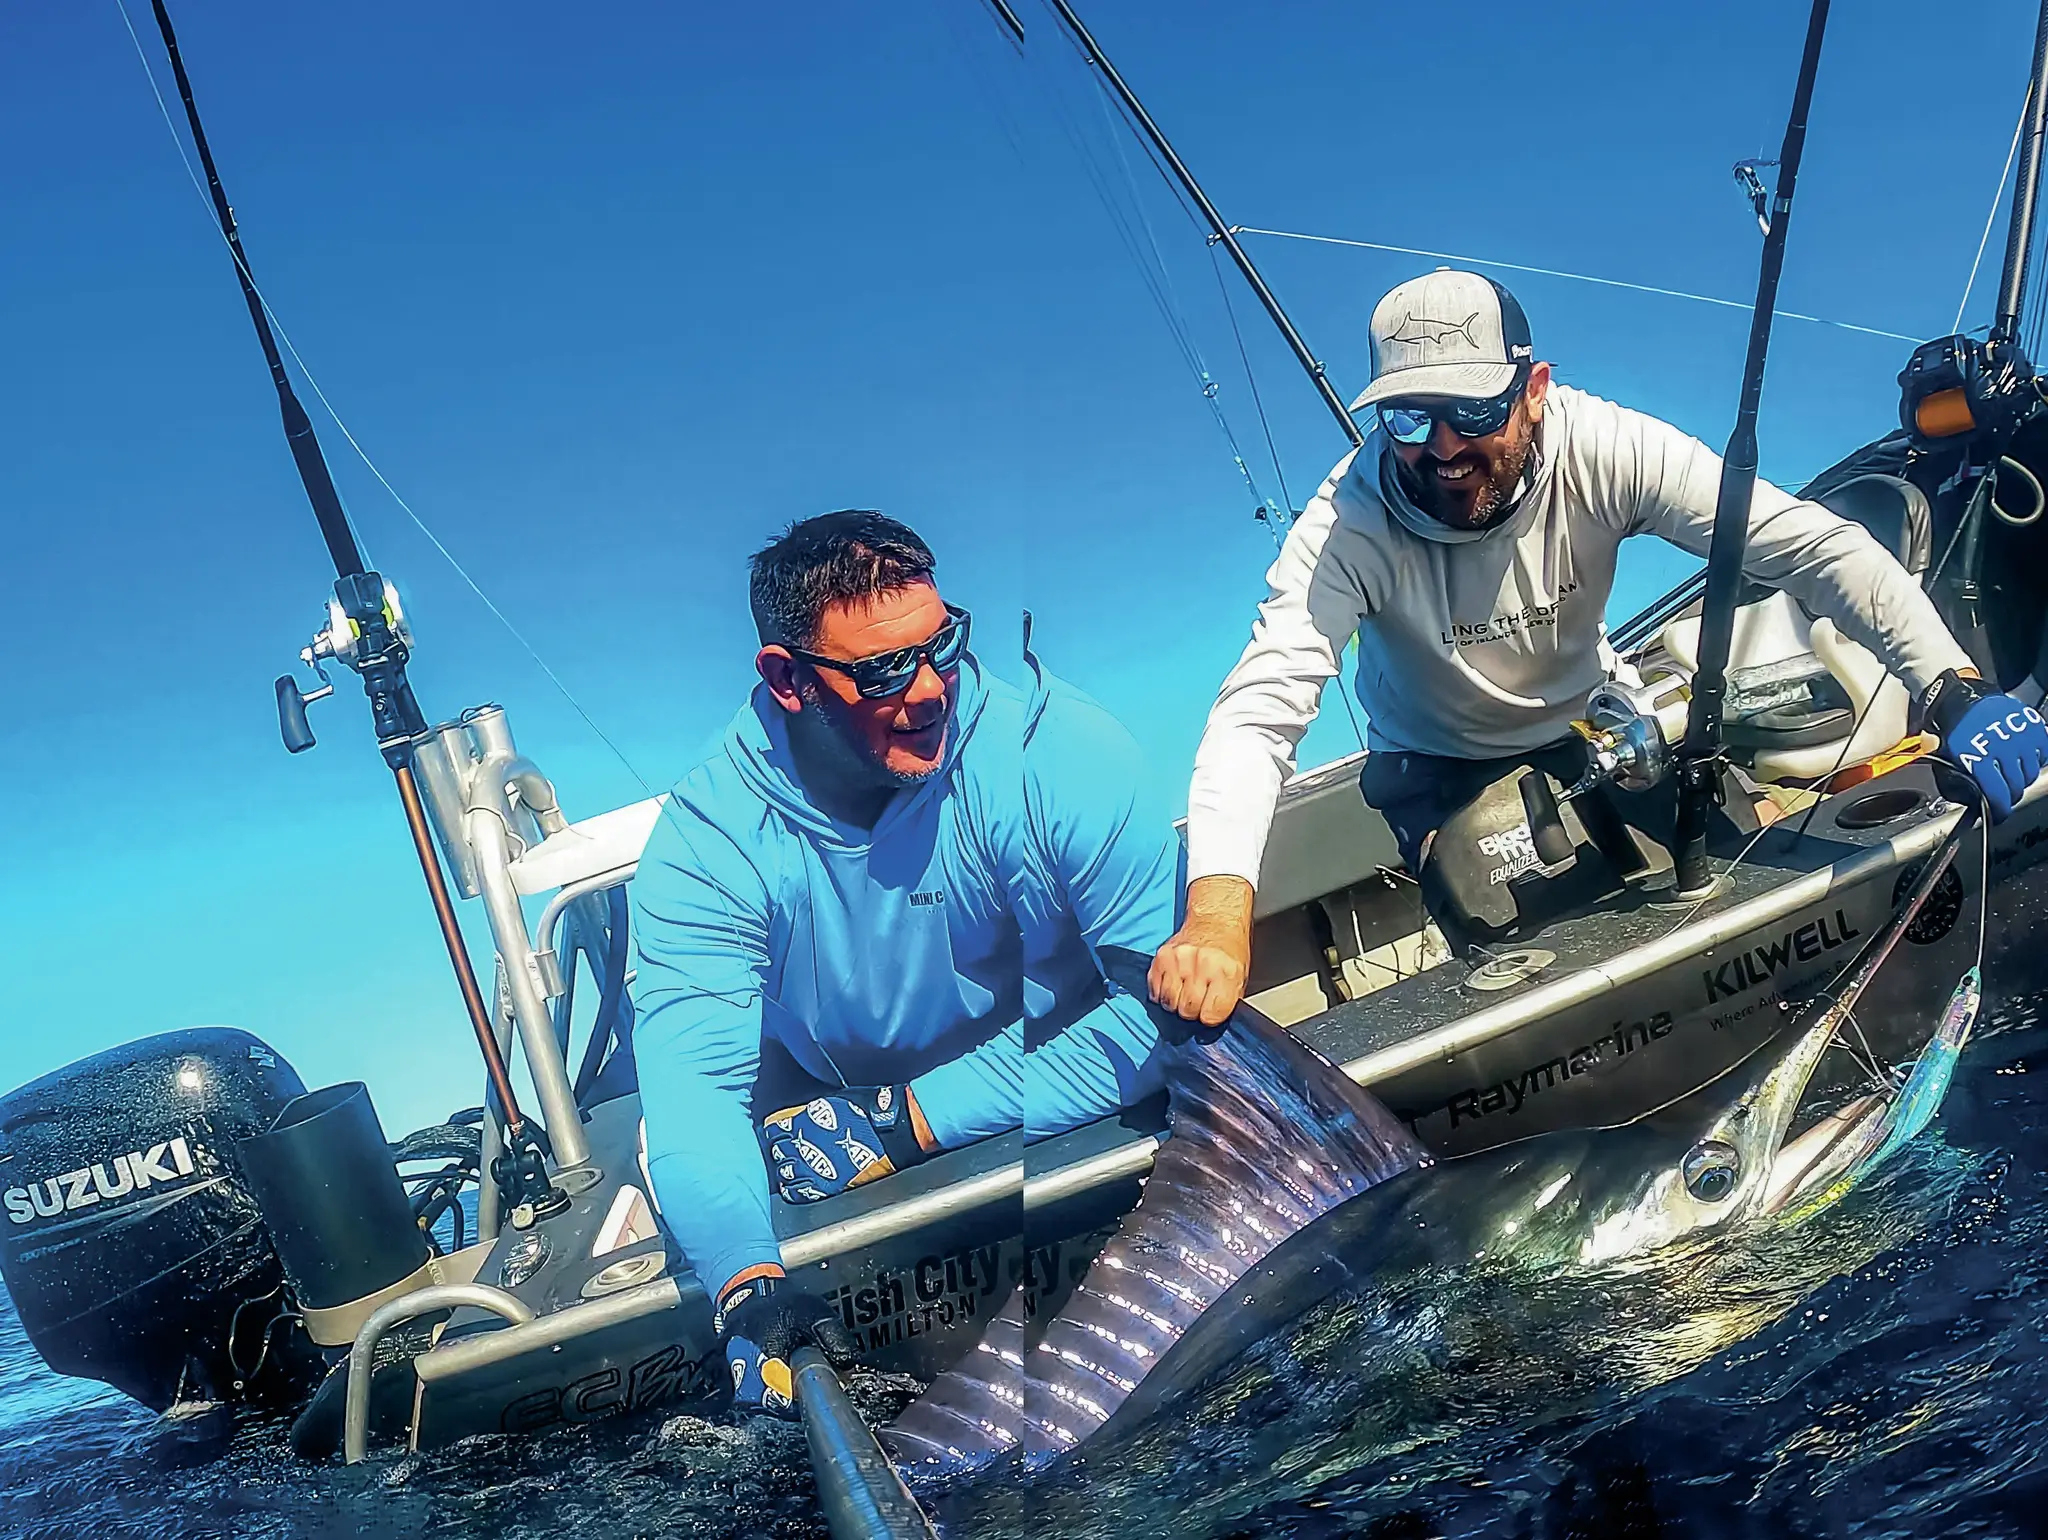 MARLIN TRIPLE ON A 15-FOOTER